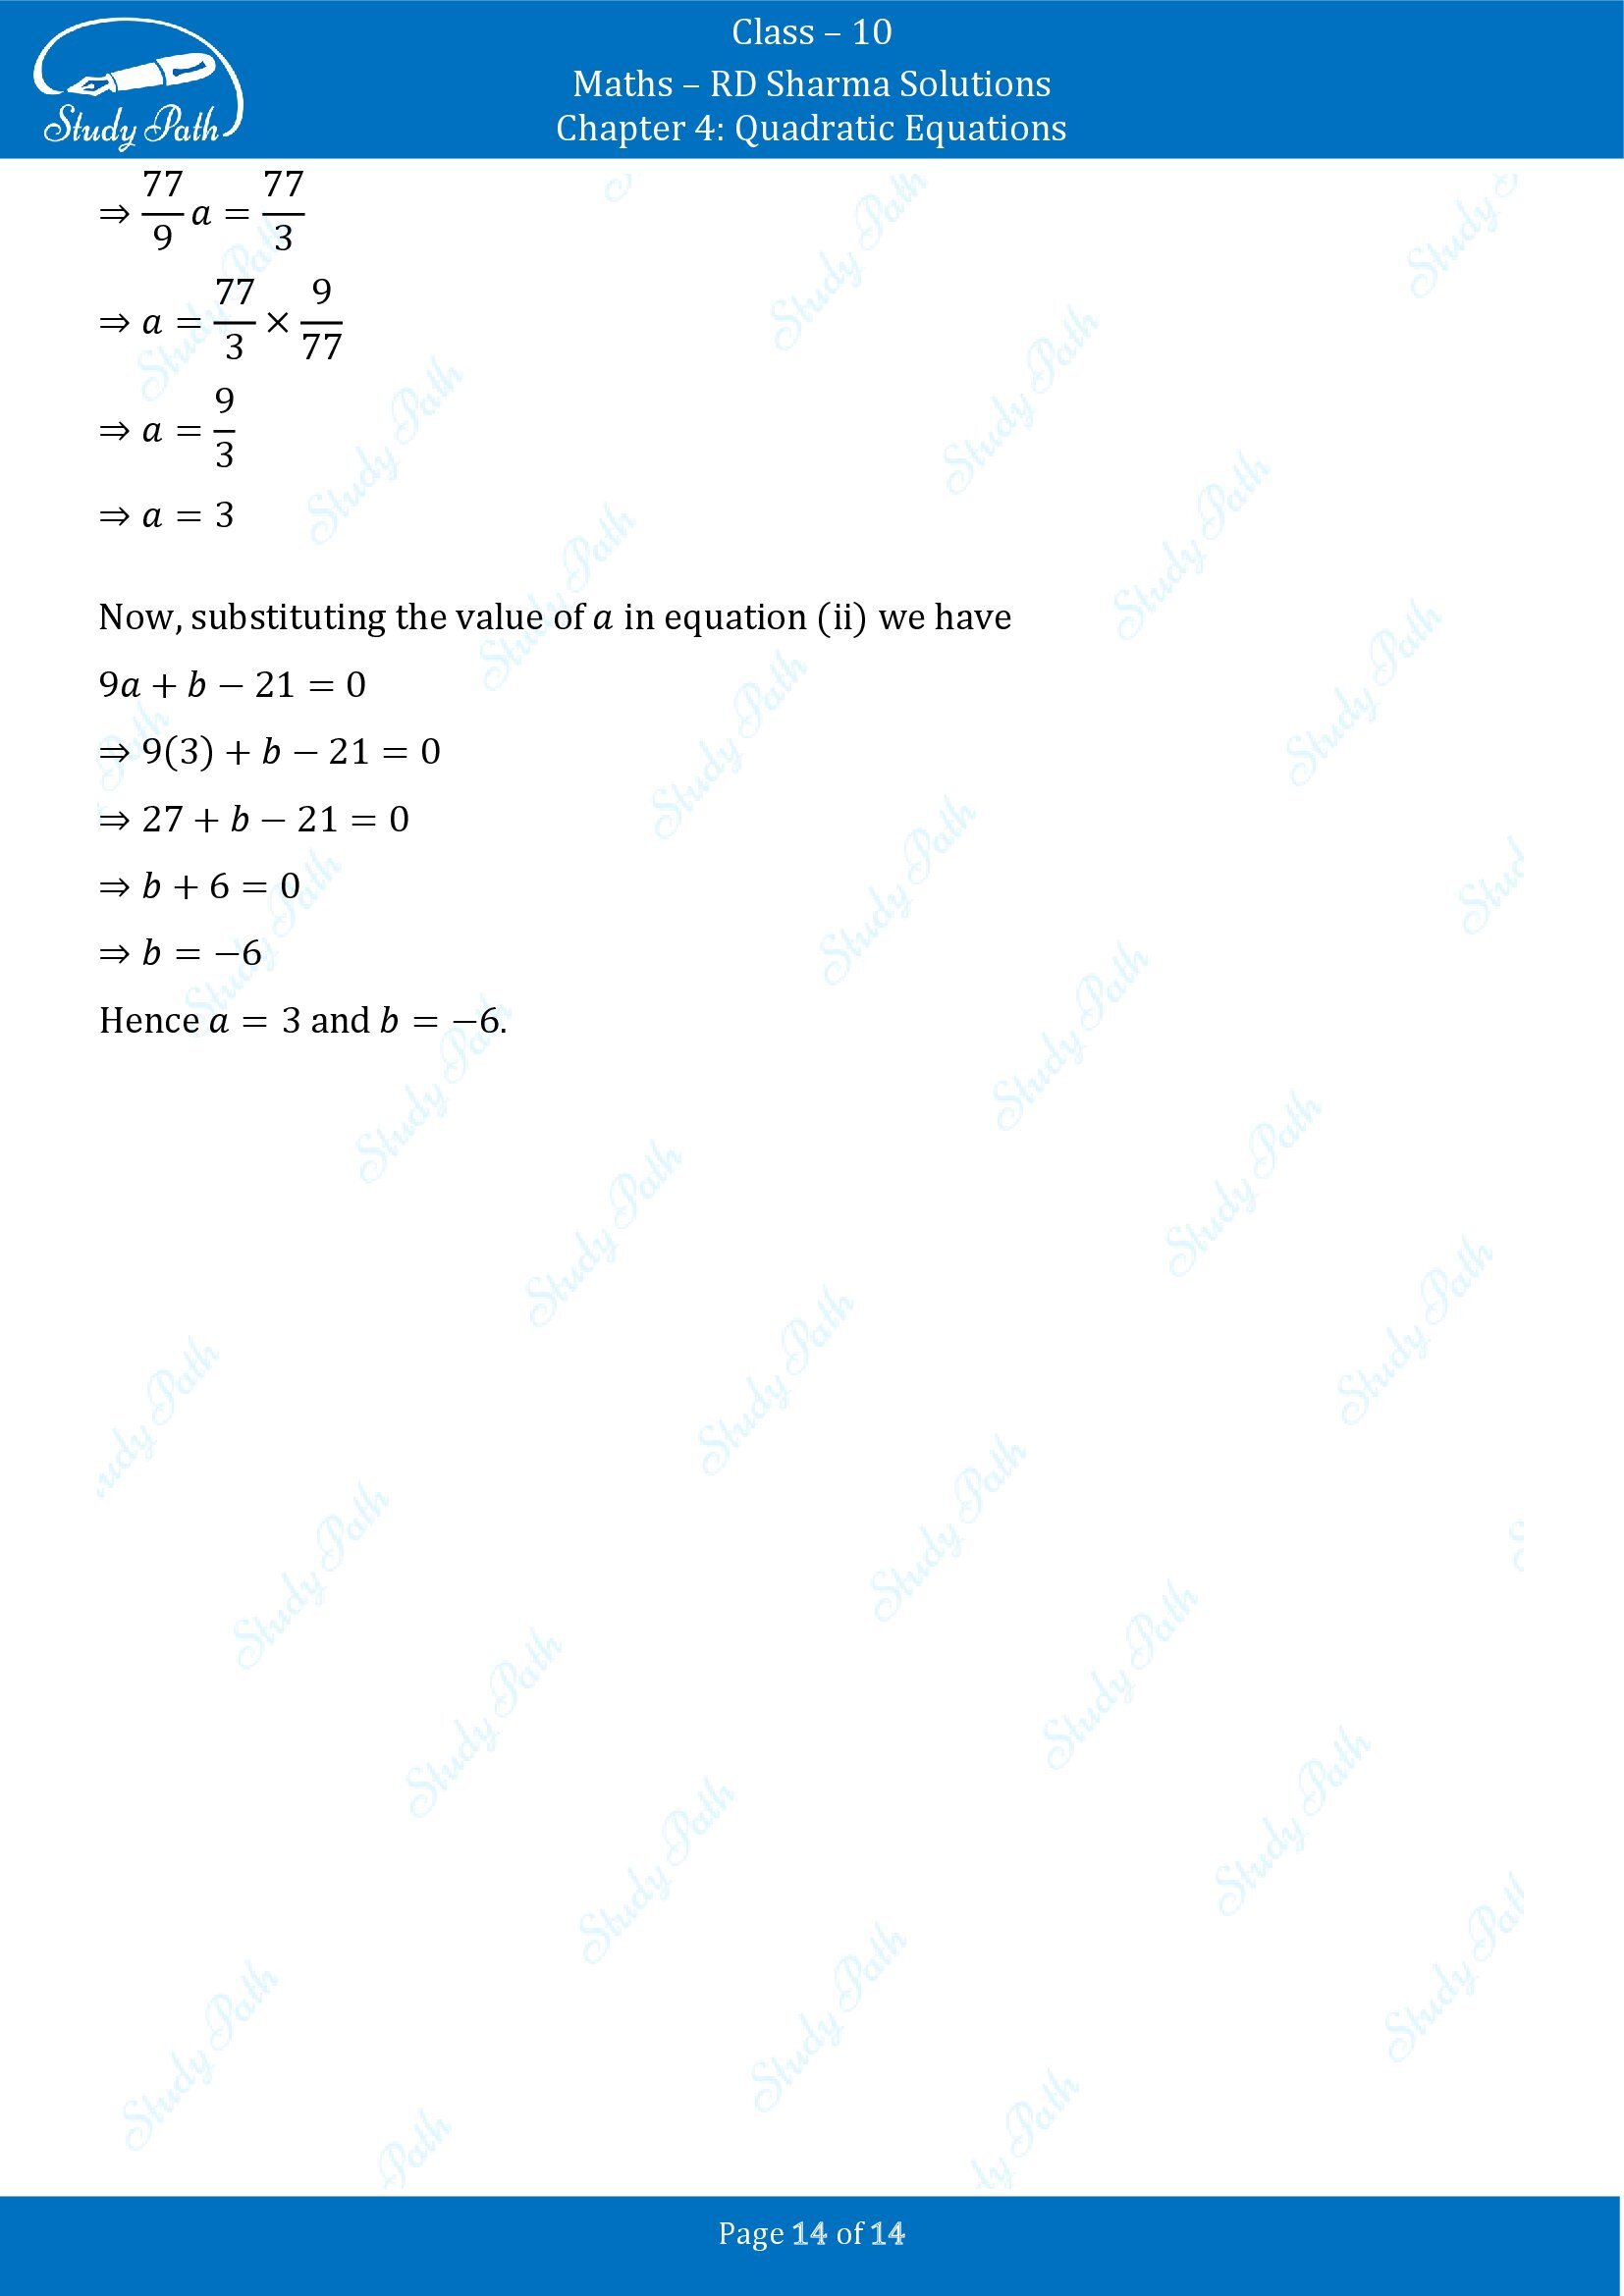 RD Sharma Solutions Class 10 Chapter 4 Quadratic Equations Exercise 4.1 00014